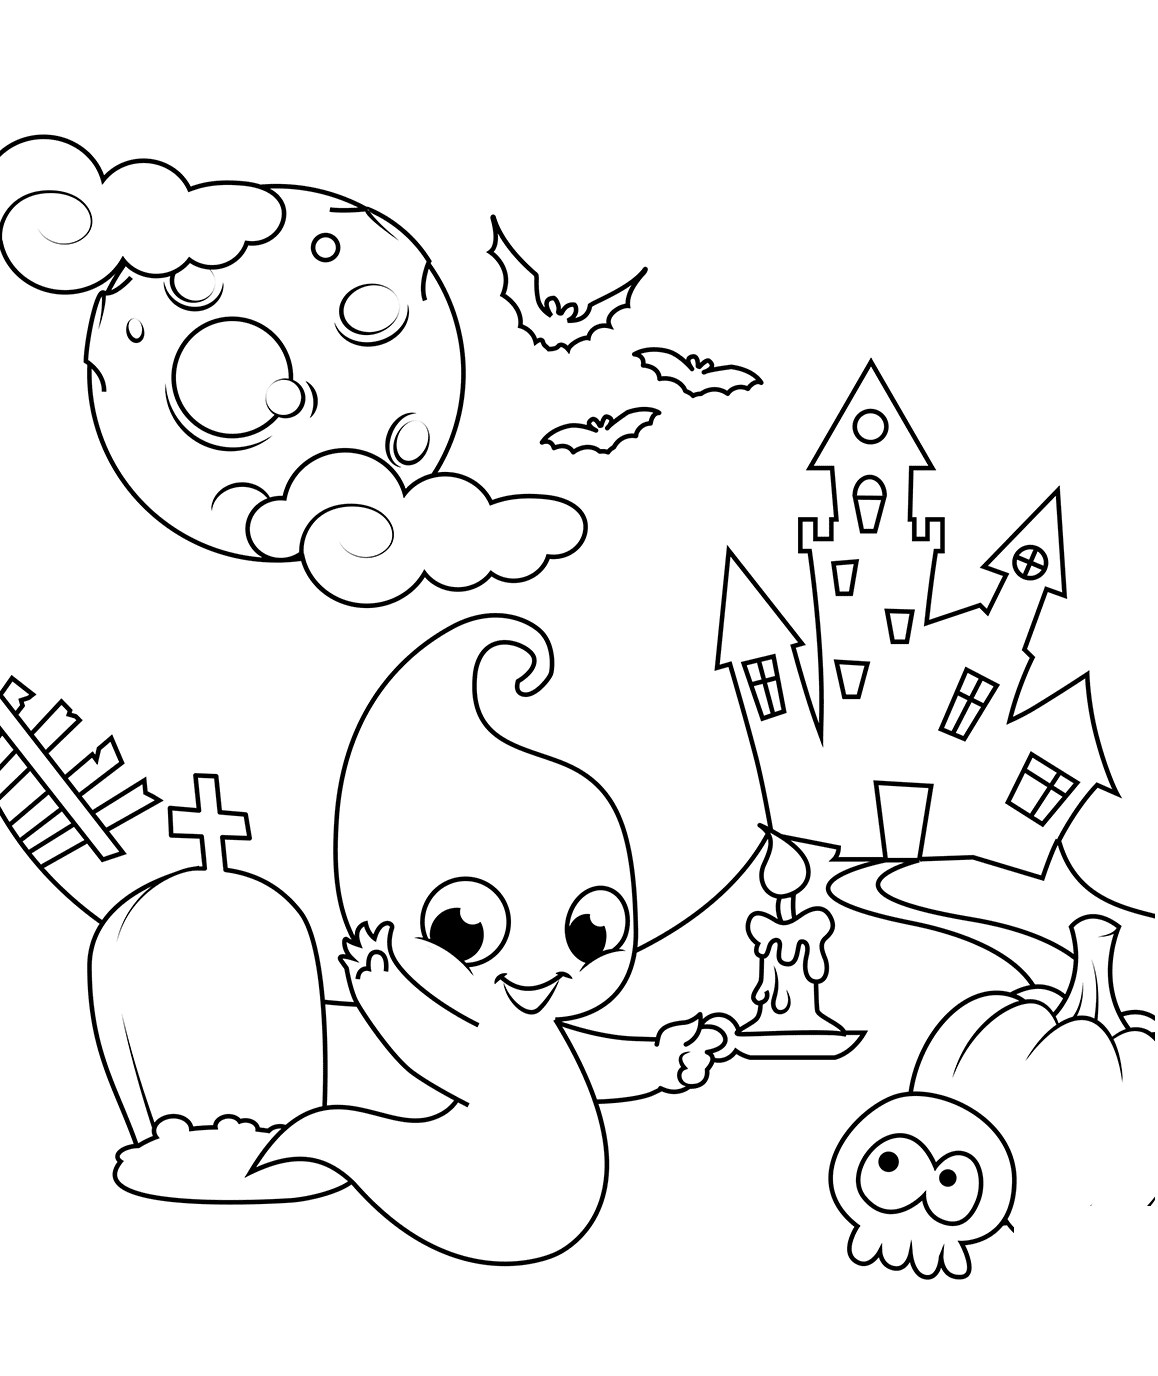 Scene With A Cute Ghost Halloween Coloring Page